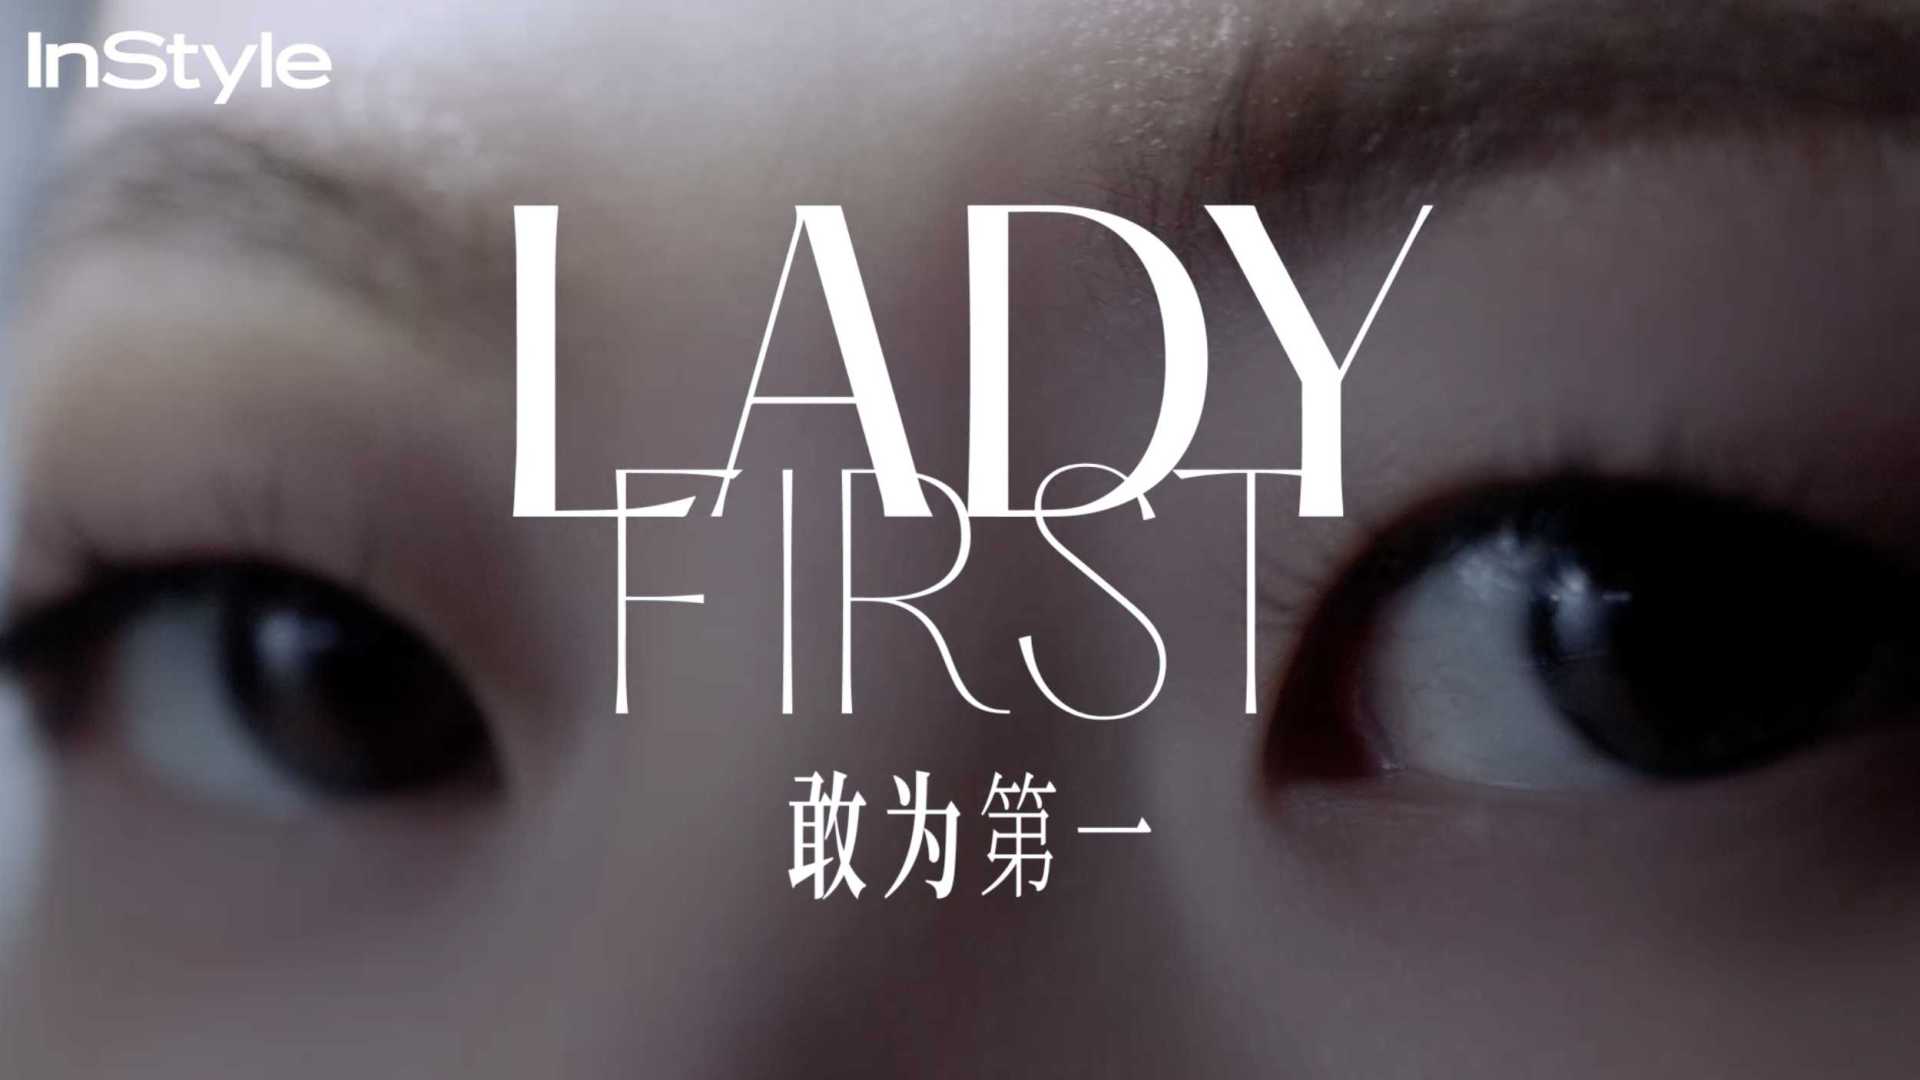 InStyle&Omega 白响恩 Lady First